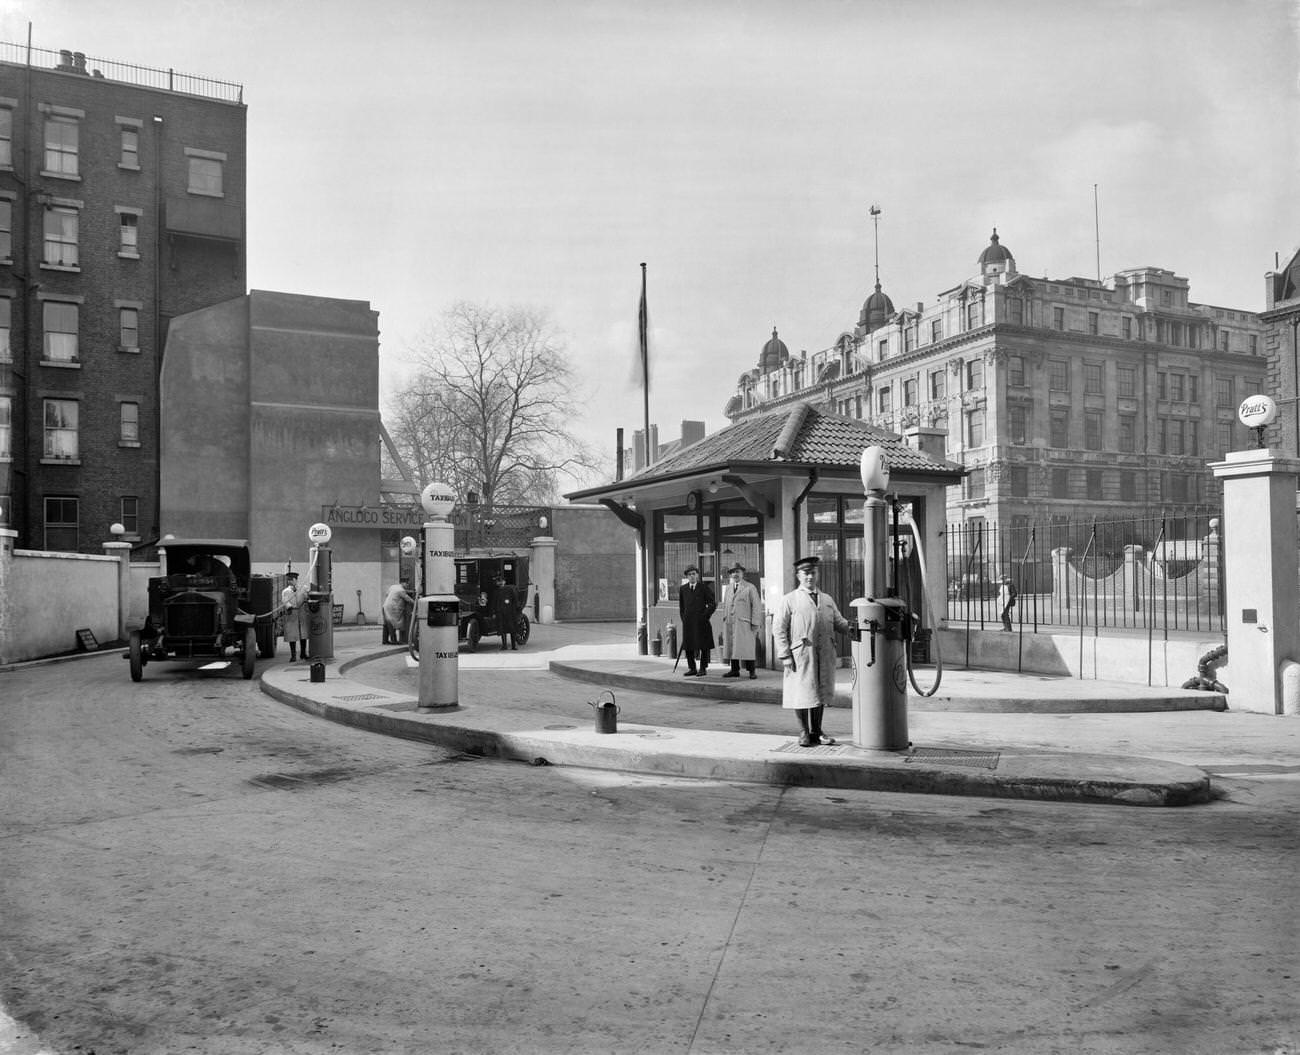 Anglo-American Oil Company Petrol Station on Euston Road, London, evolved into Esso, specializing initially in lamp oil imports from the US, 1922.